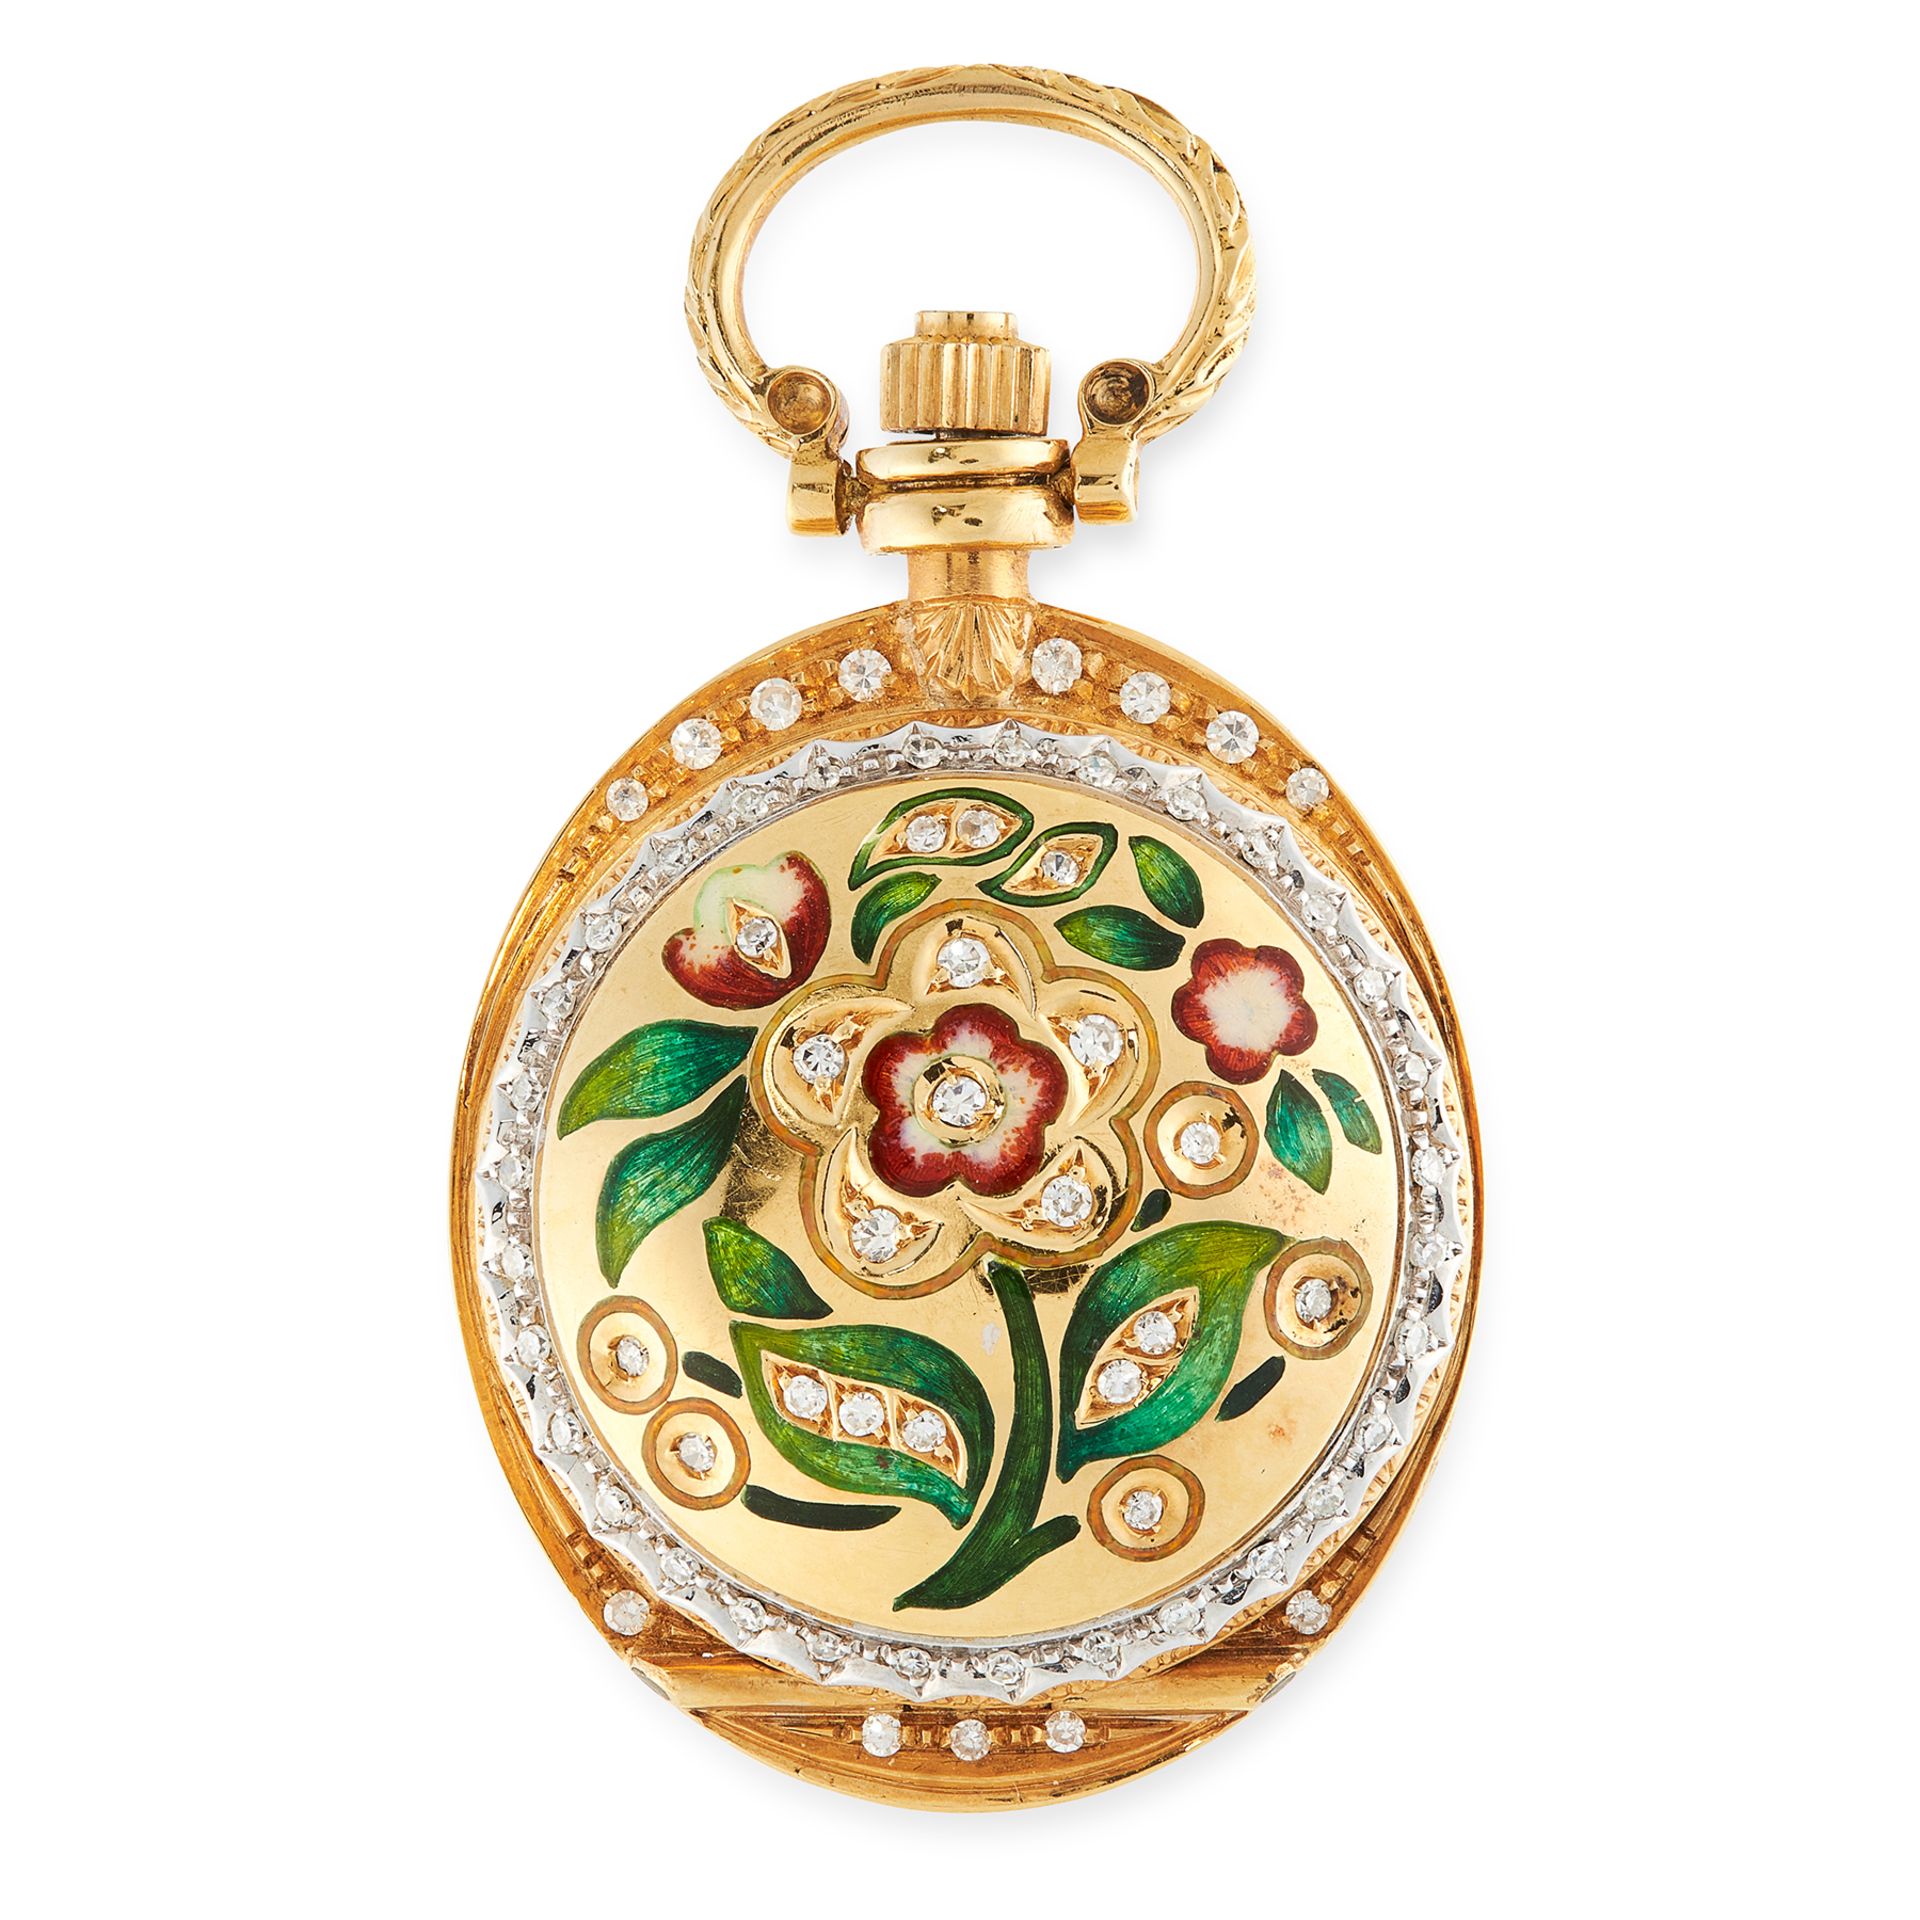 A DIAMOND AND ENAMEL POCKET WATCH, LONGINES in yellow gold, the round face jewelled with enamel